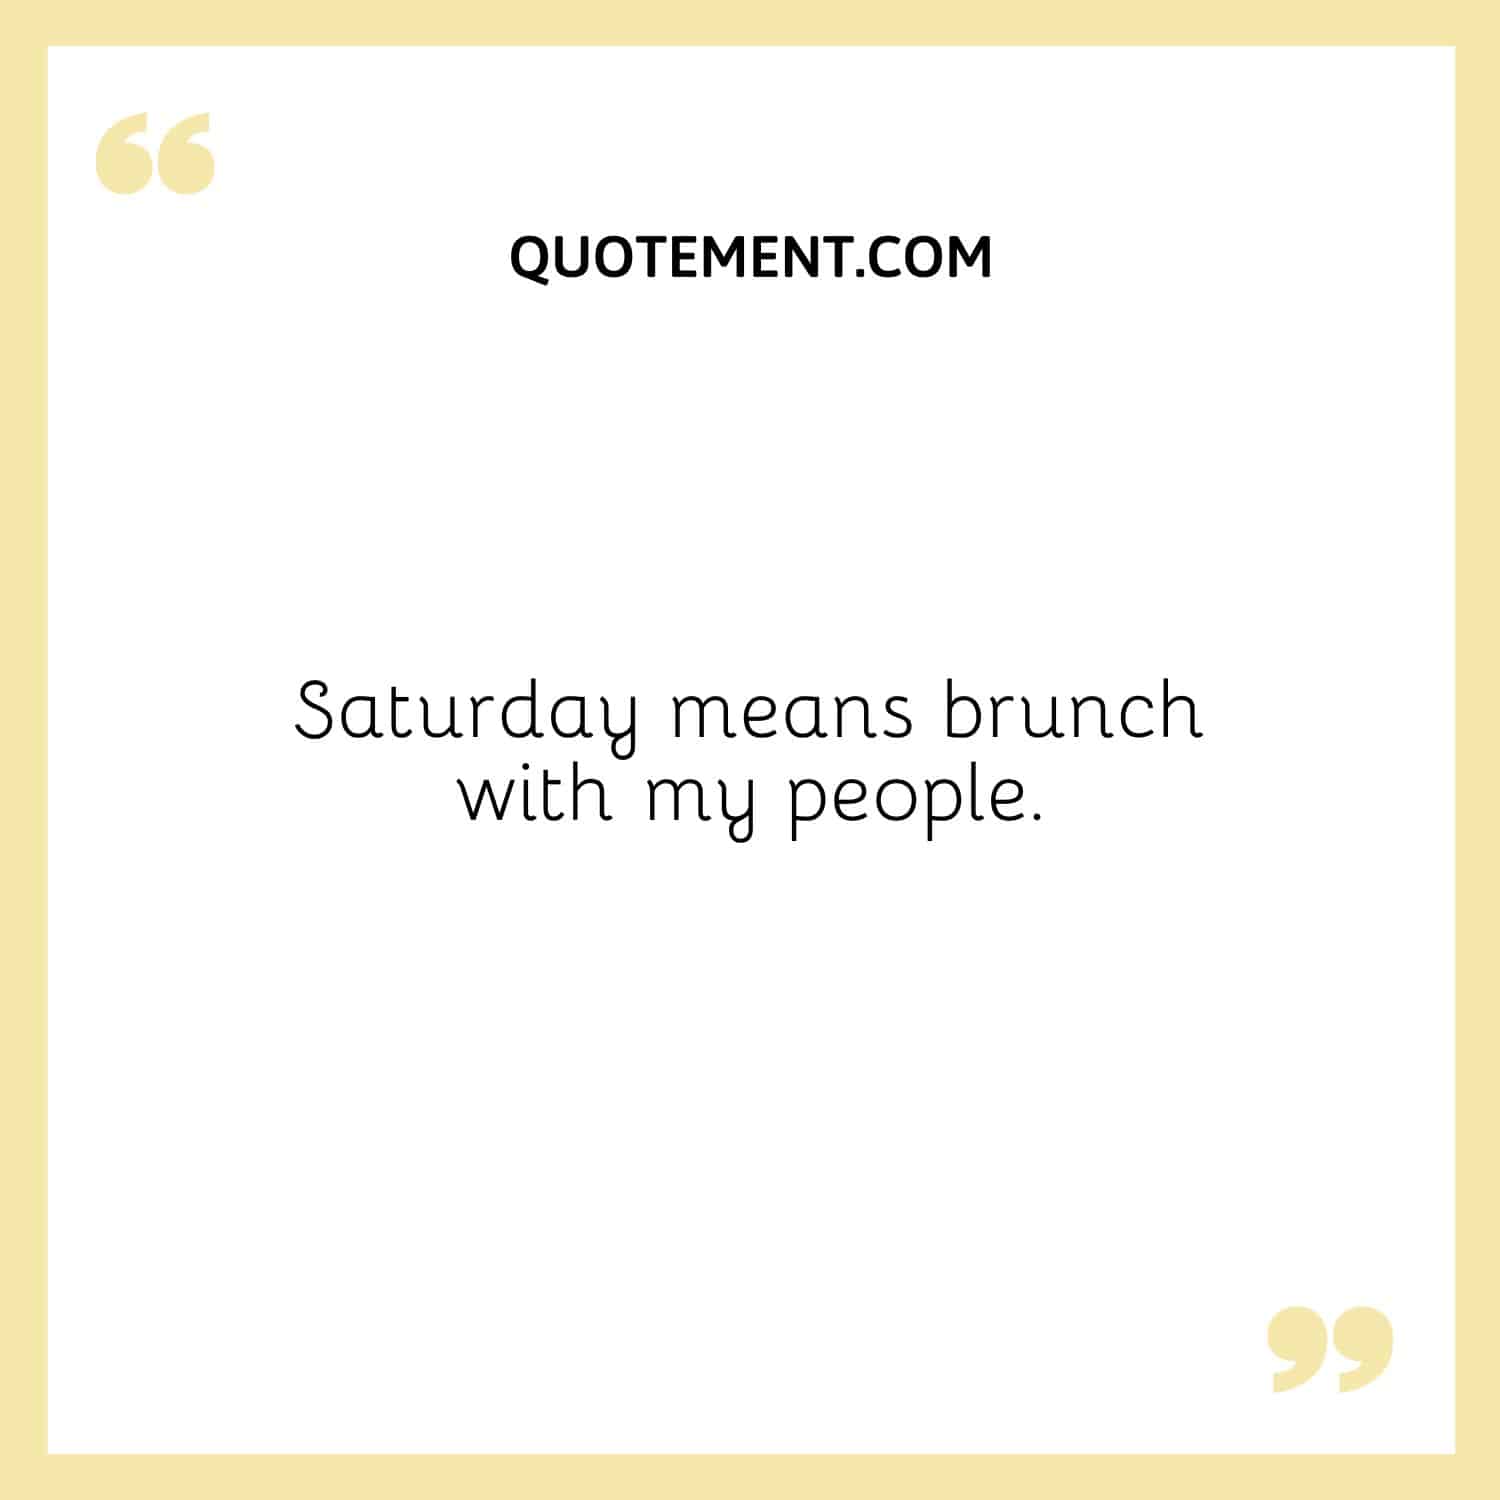 Saturday means brunch with my people